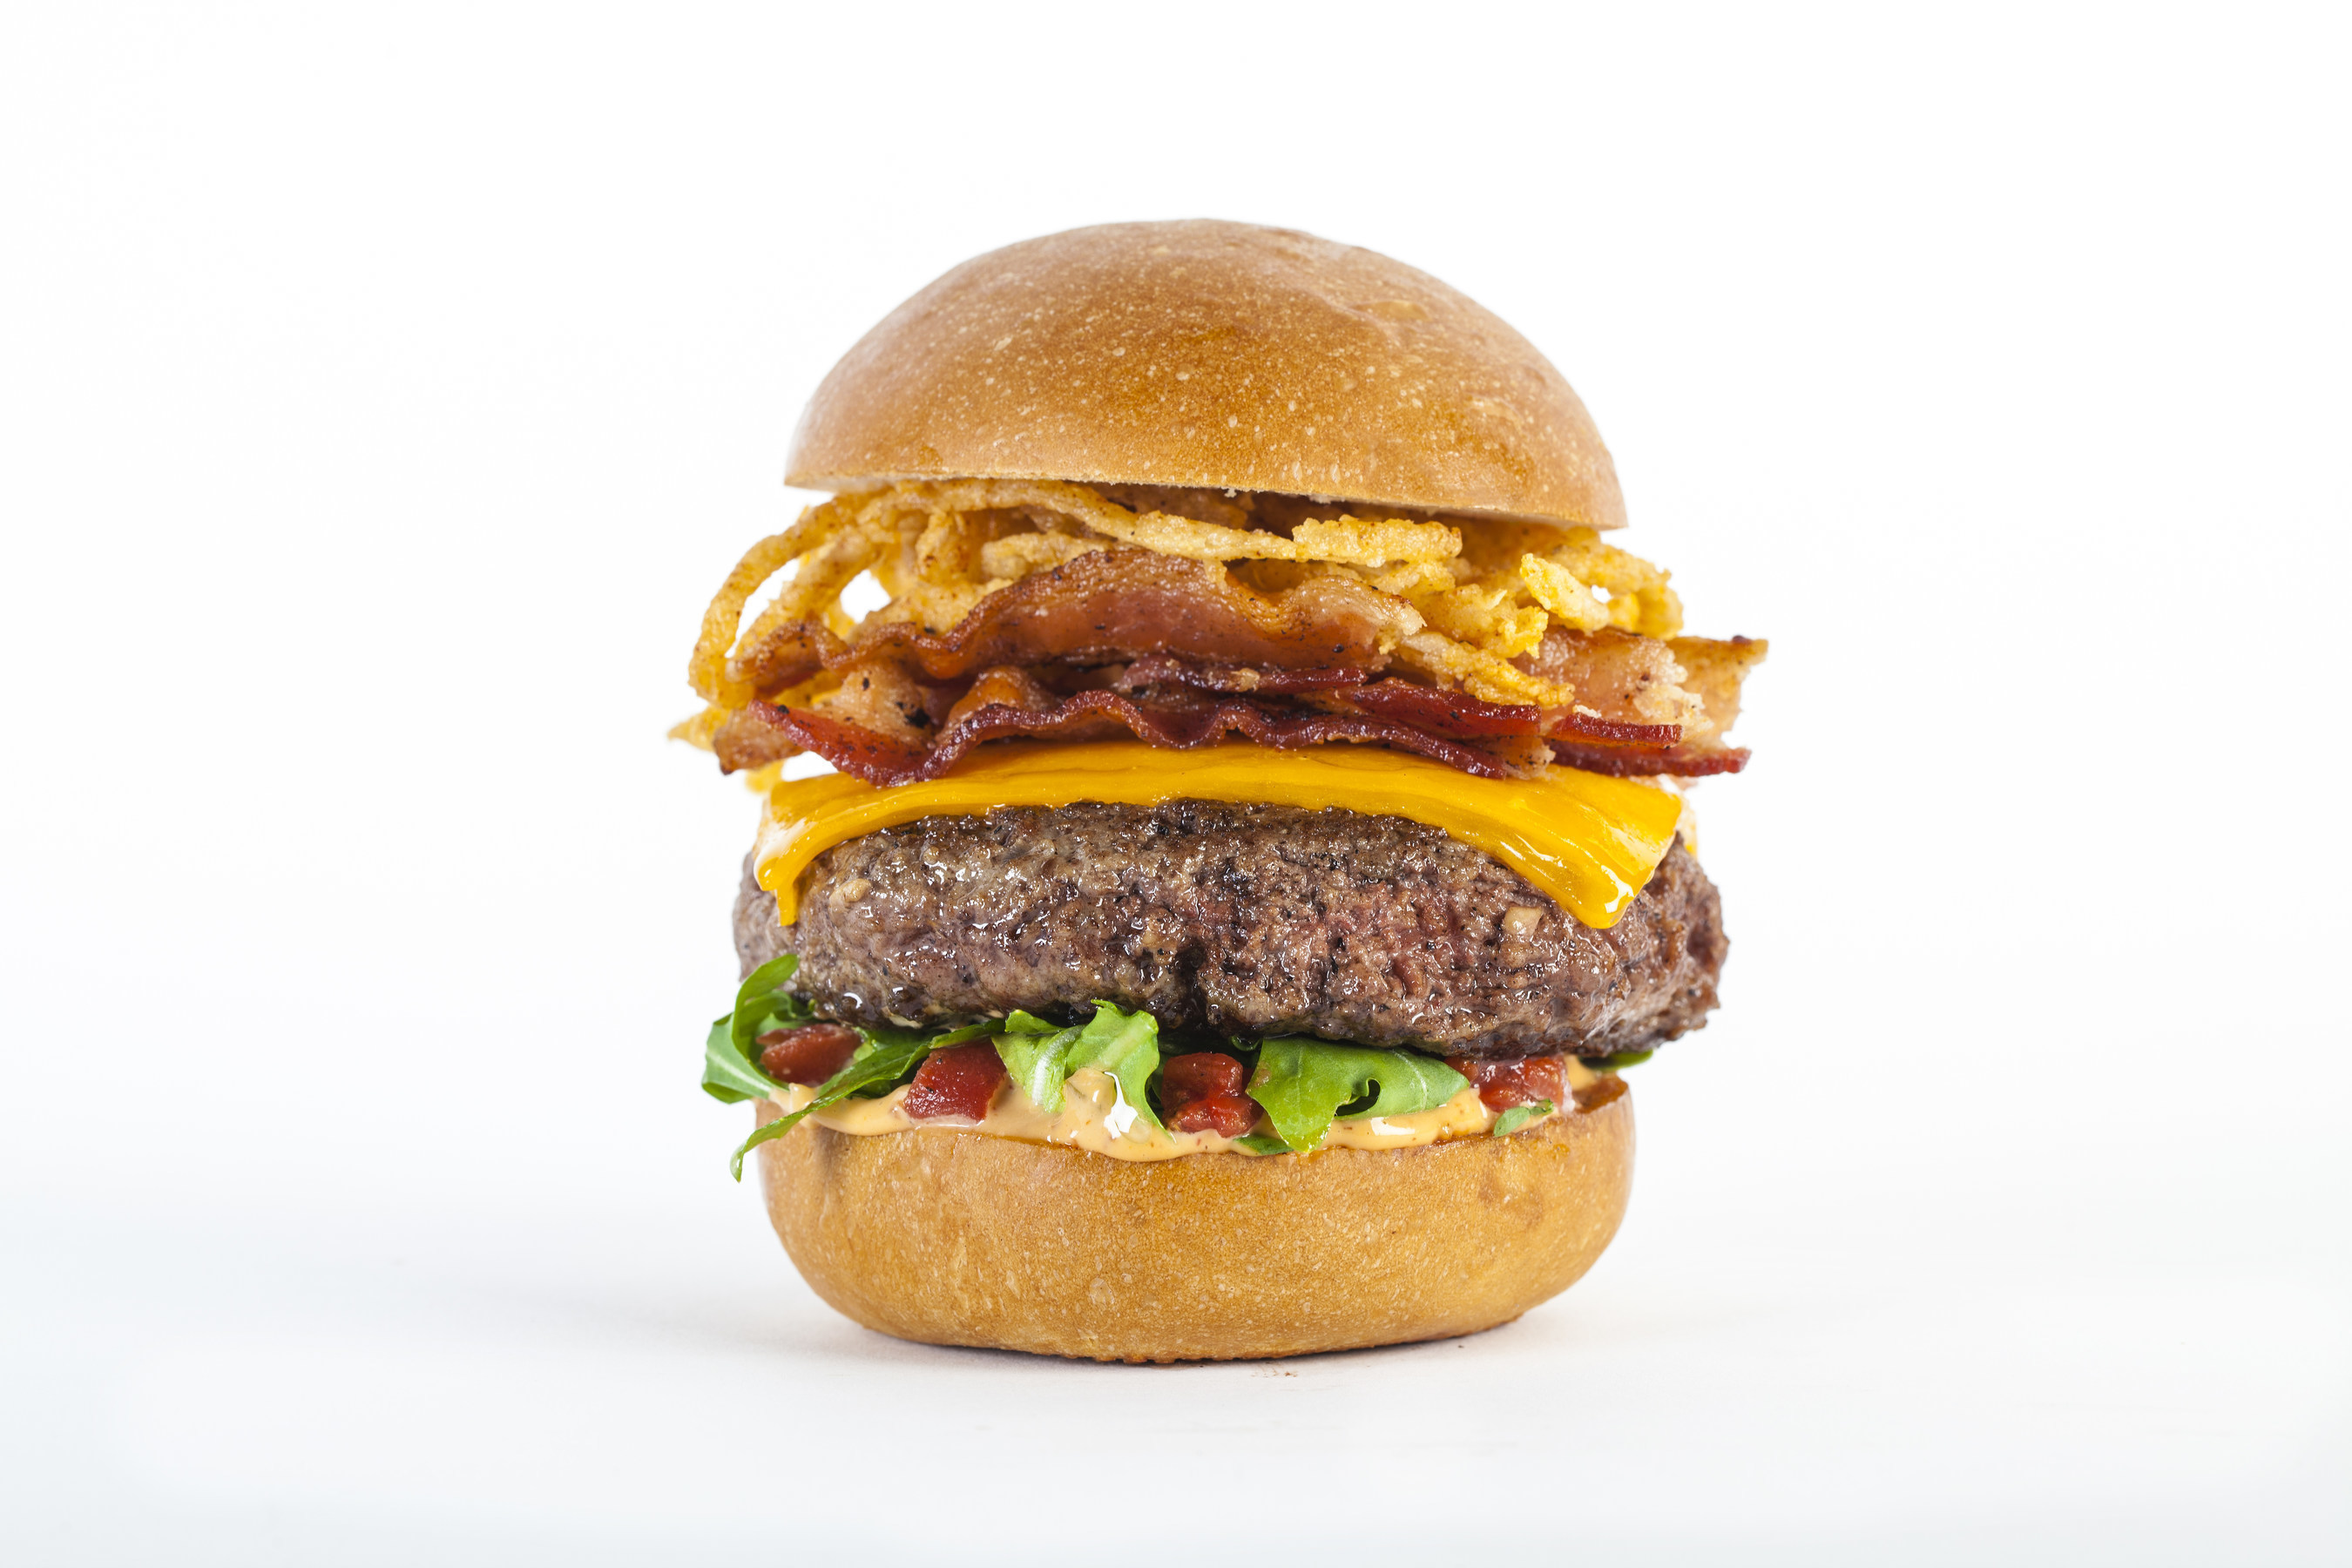 Burger Parlor Smokey Burger - Hormone free and antibiotic free Nebraskan beef is ground fresh in house and topped with smoked bacon, crispy onions, Wisconsin cheddar cheese, arugula, oven roasted tomatoes and chipotle aioli to create this fan favorite.